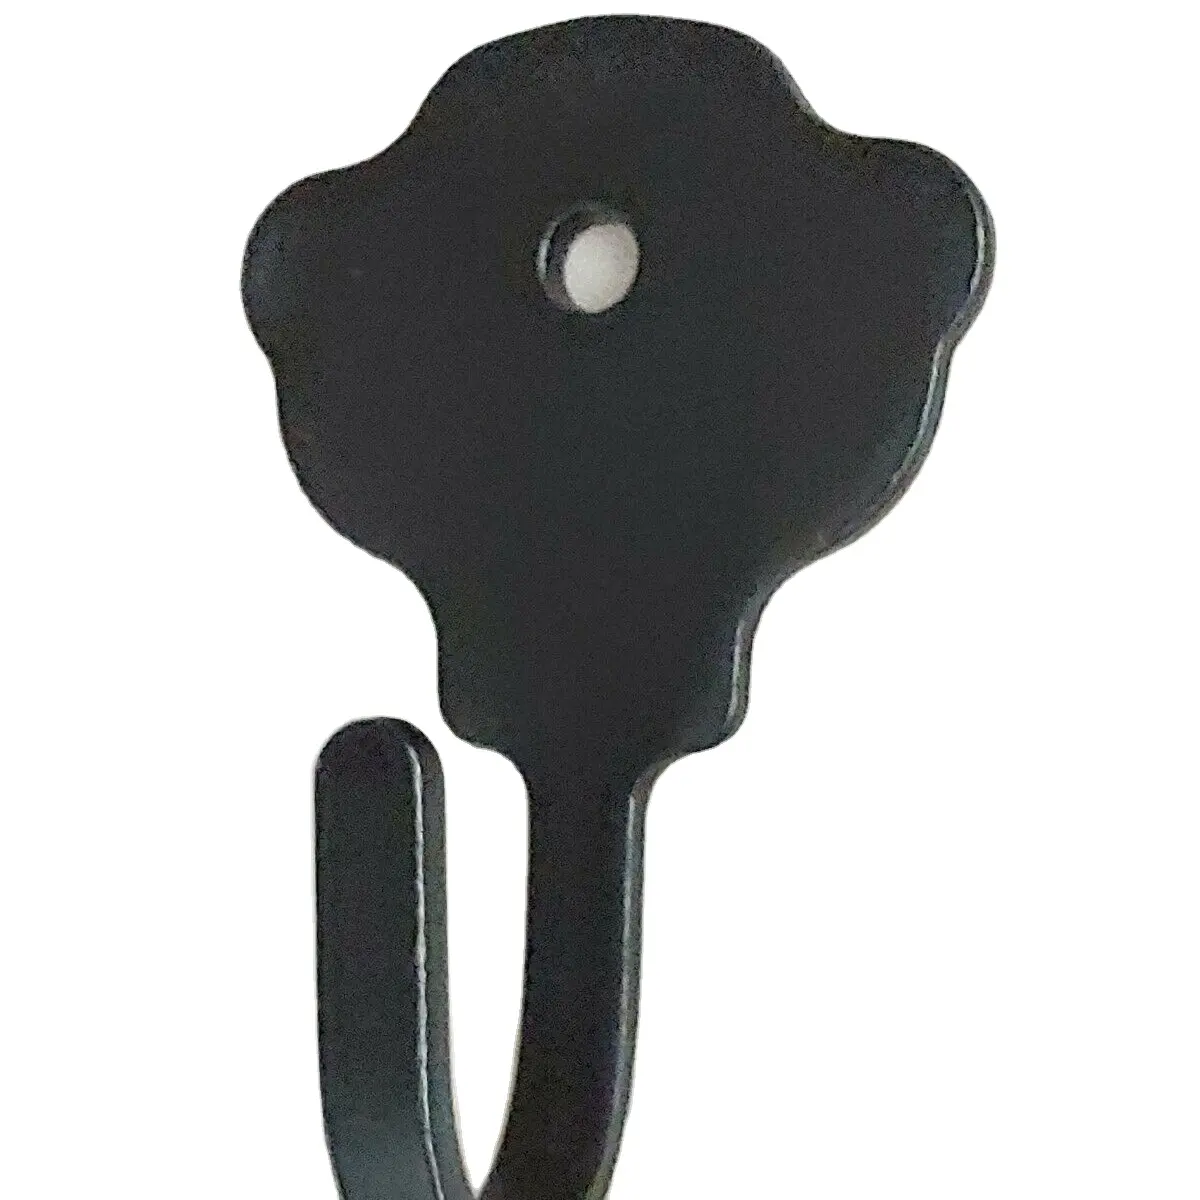 Handmade Hooks for Wall Iron Key Holder Hook For Living Room Bedroom Hallway and Office Decoration Purpose Wholesale Price.